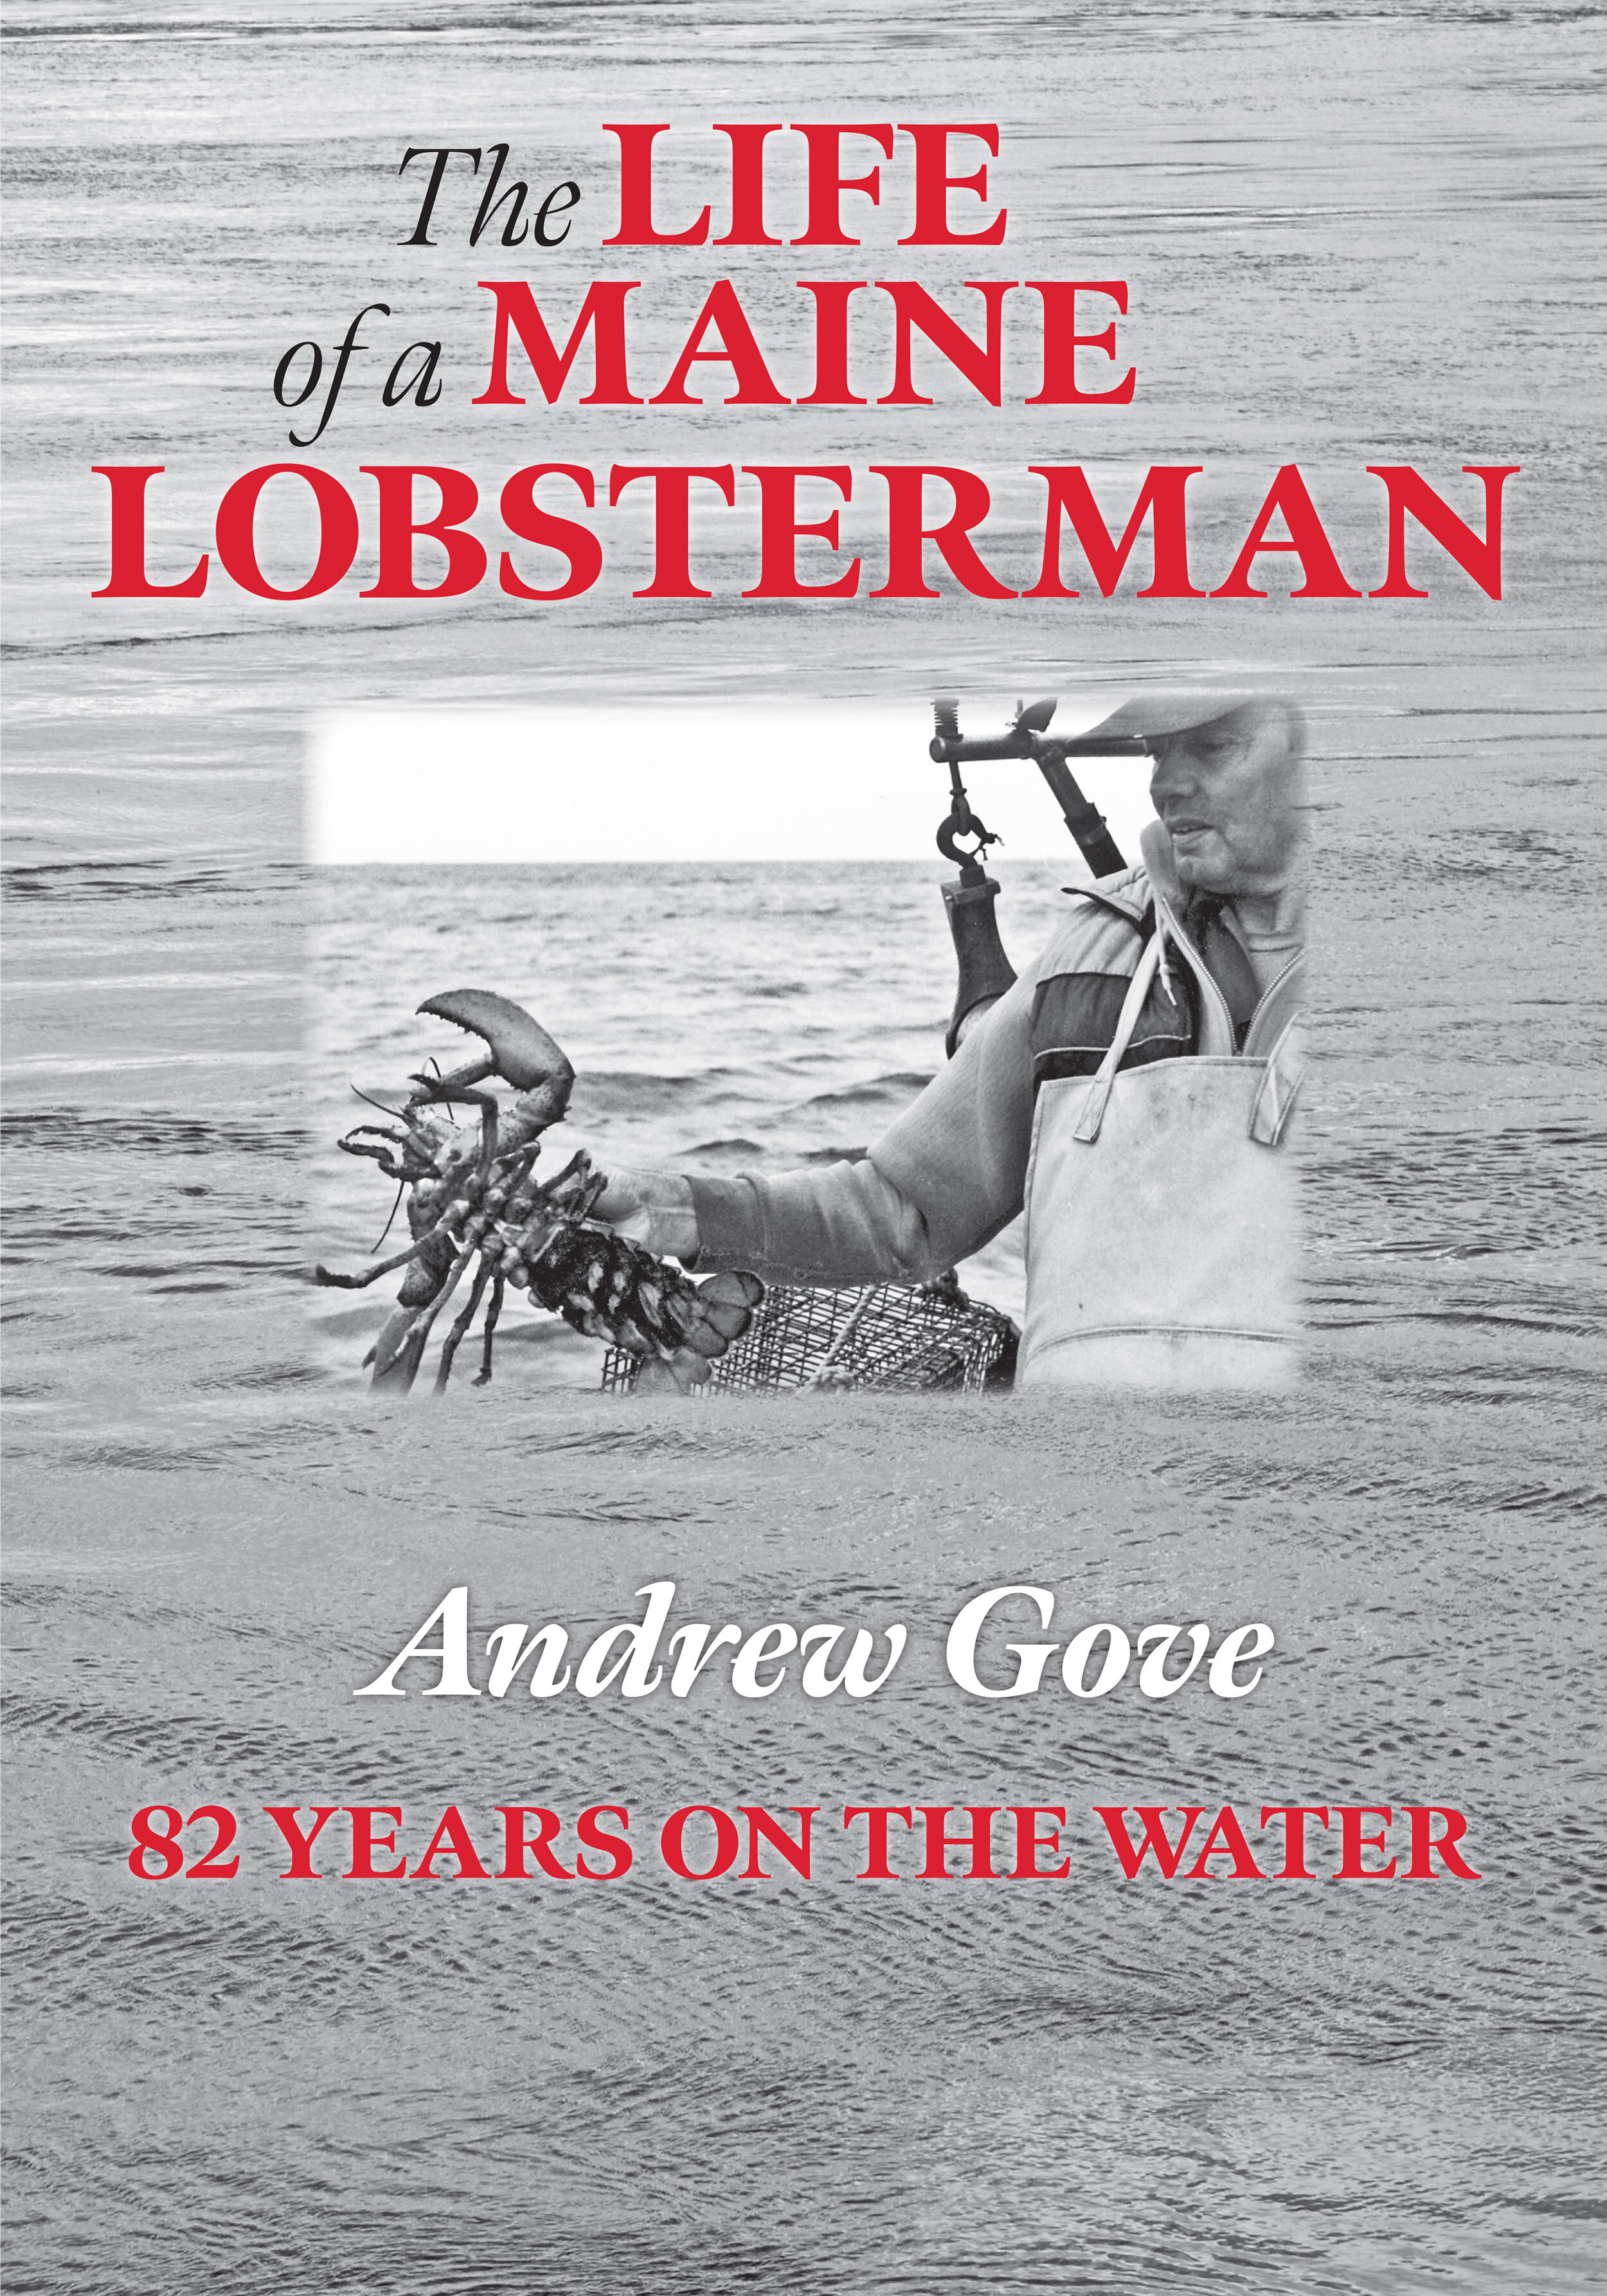 The Life of a Maine Lobsterman front cover.jpg